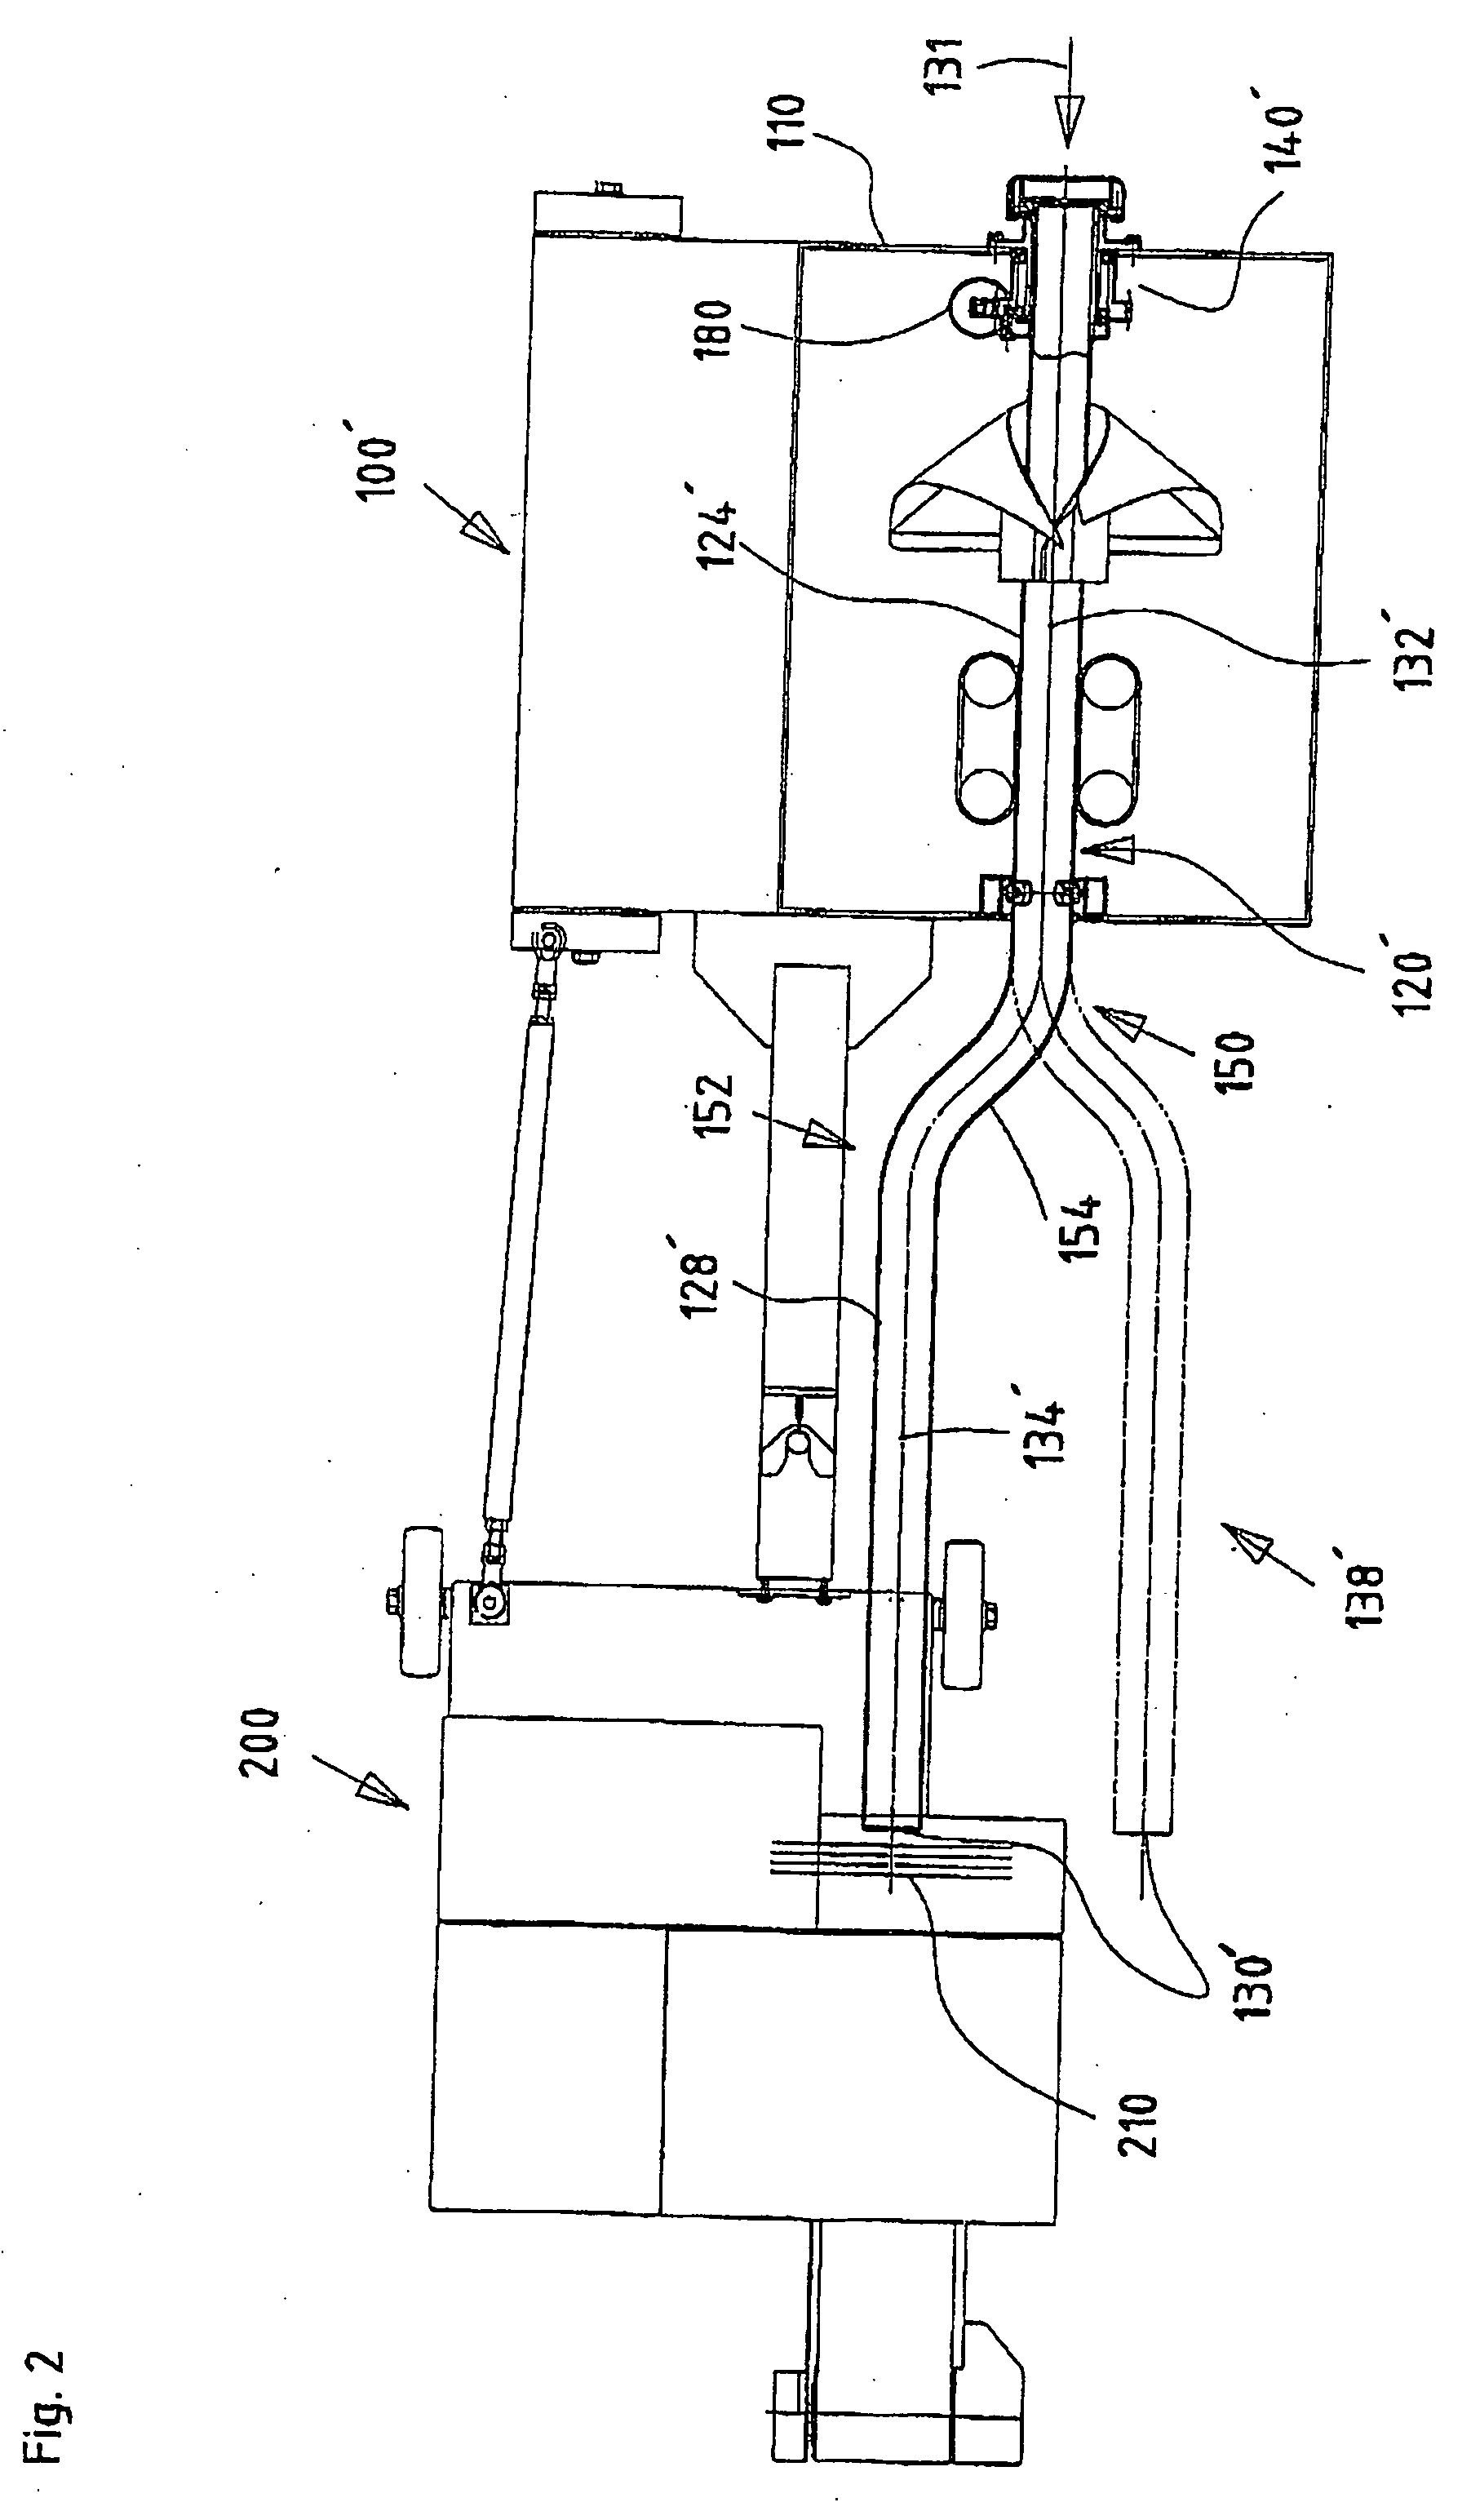 Packaging device for free-flowing bulk material (filling)